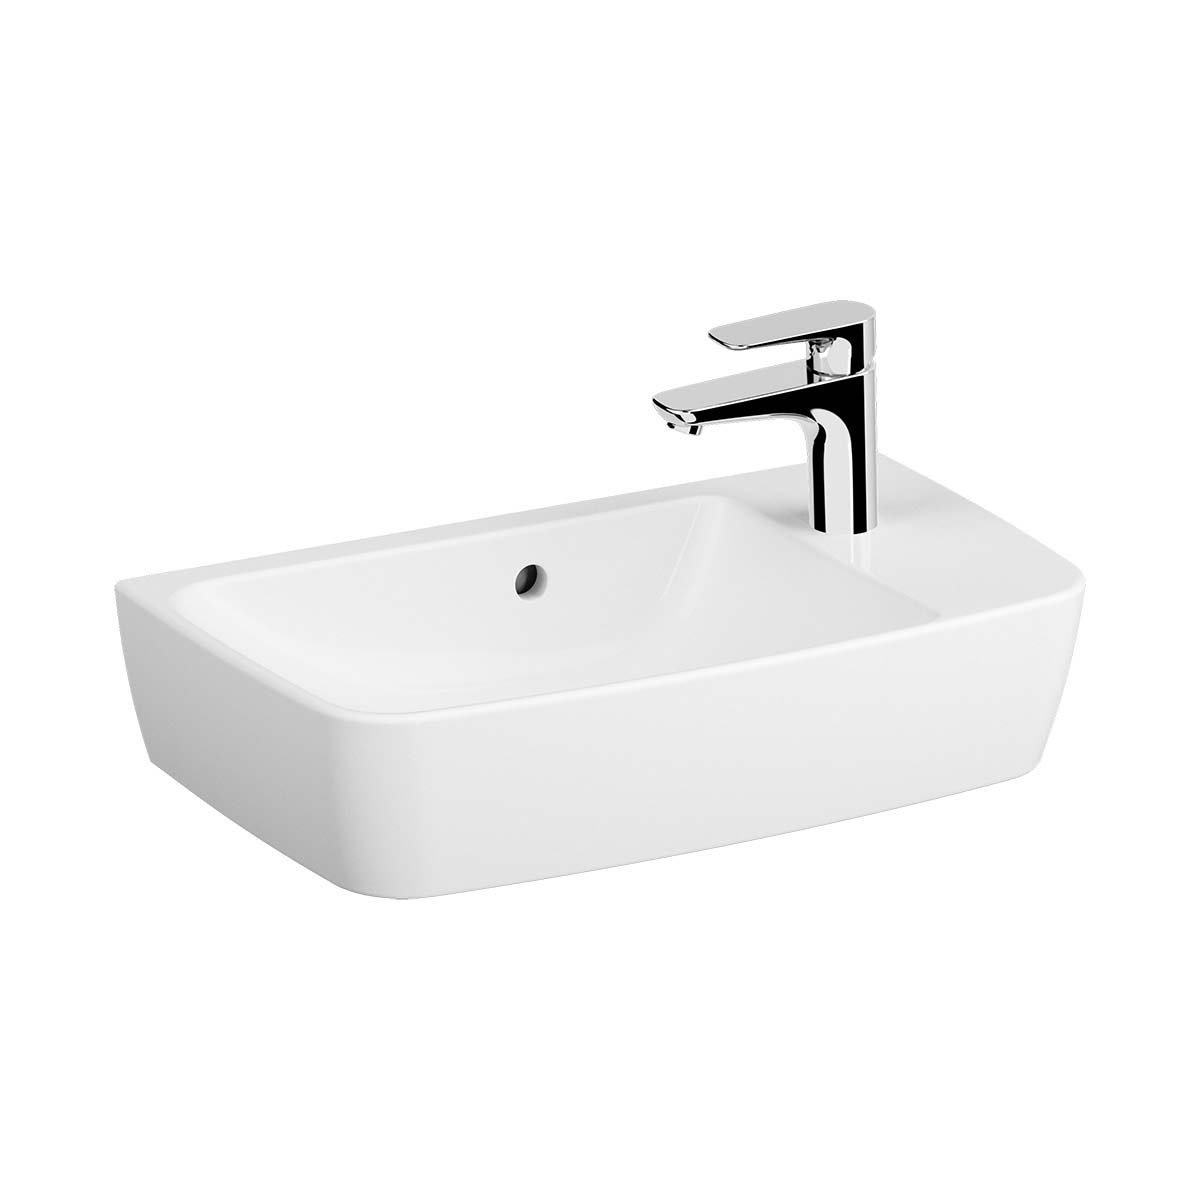 Compact Basin, 60X35 cm, One Tap Hole, With Overflow Hole